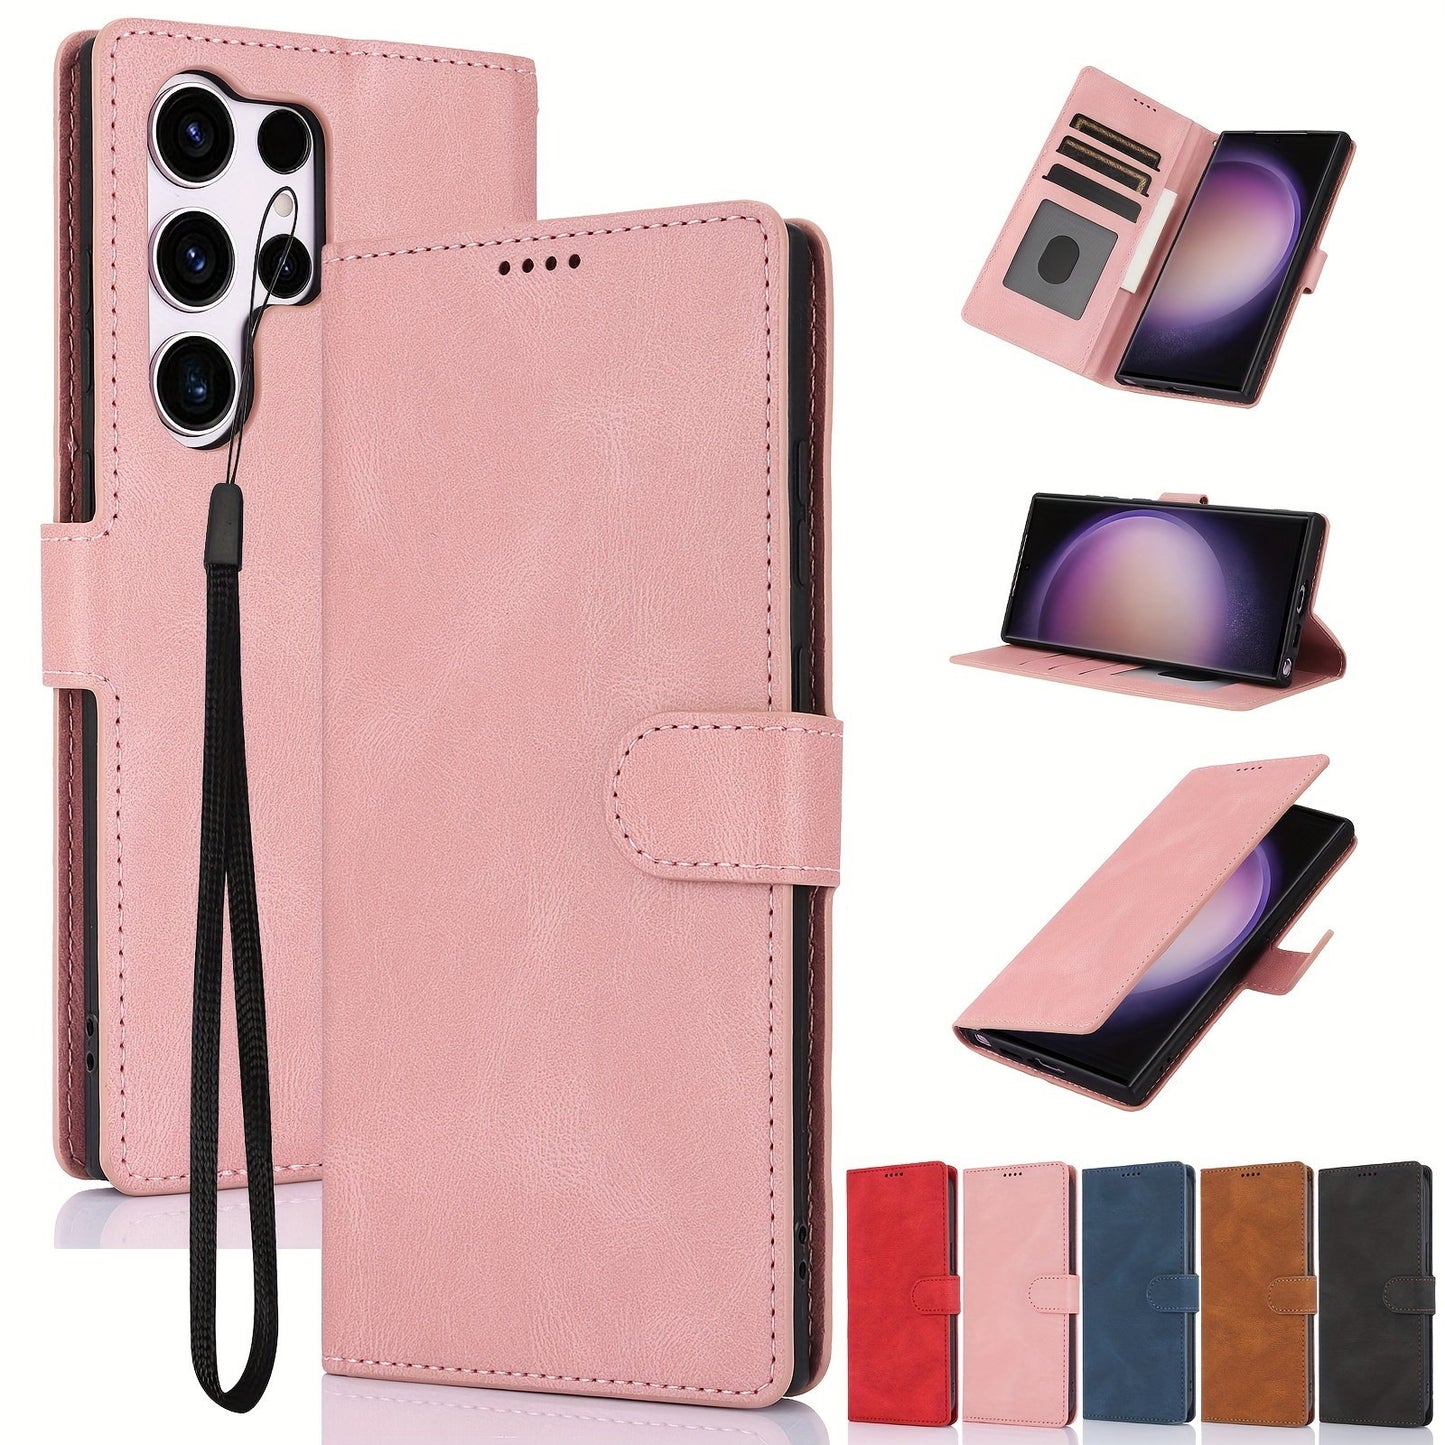 Crossbody Wallet Faux Leather Phone Case For Samsung Galaxy S24 S23 S22 S21 S20 Ultra S24 S10 S9 S8 Plus S23/S21/S20 FE S7 Edge Note 8 9 10 Pro Note 20 Ultra Mattle Flip Credit Card Holder With Short Lanyard Magnetic Buckle Shockproof Protect Cover